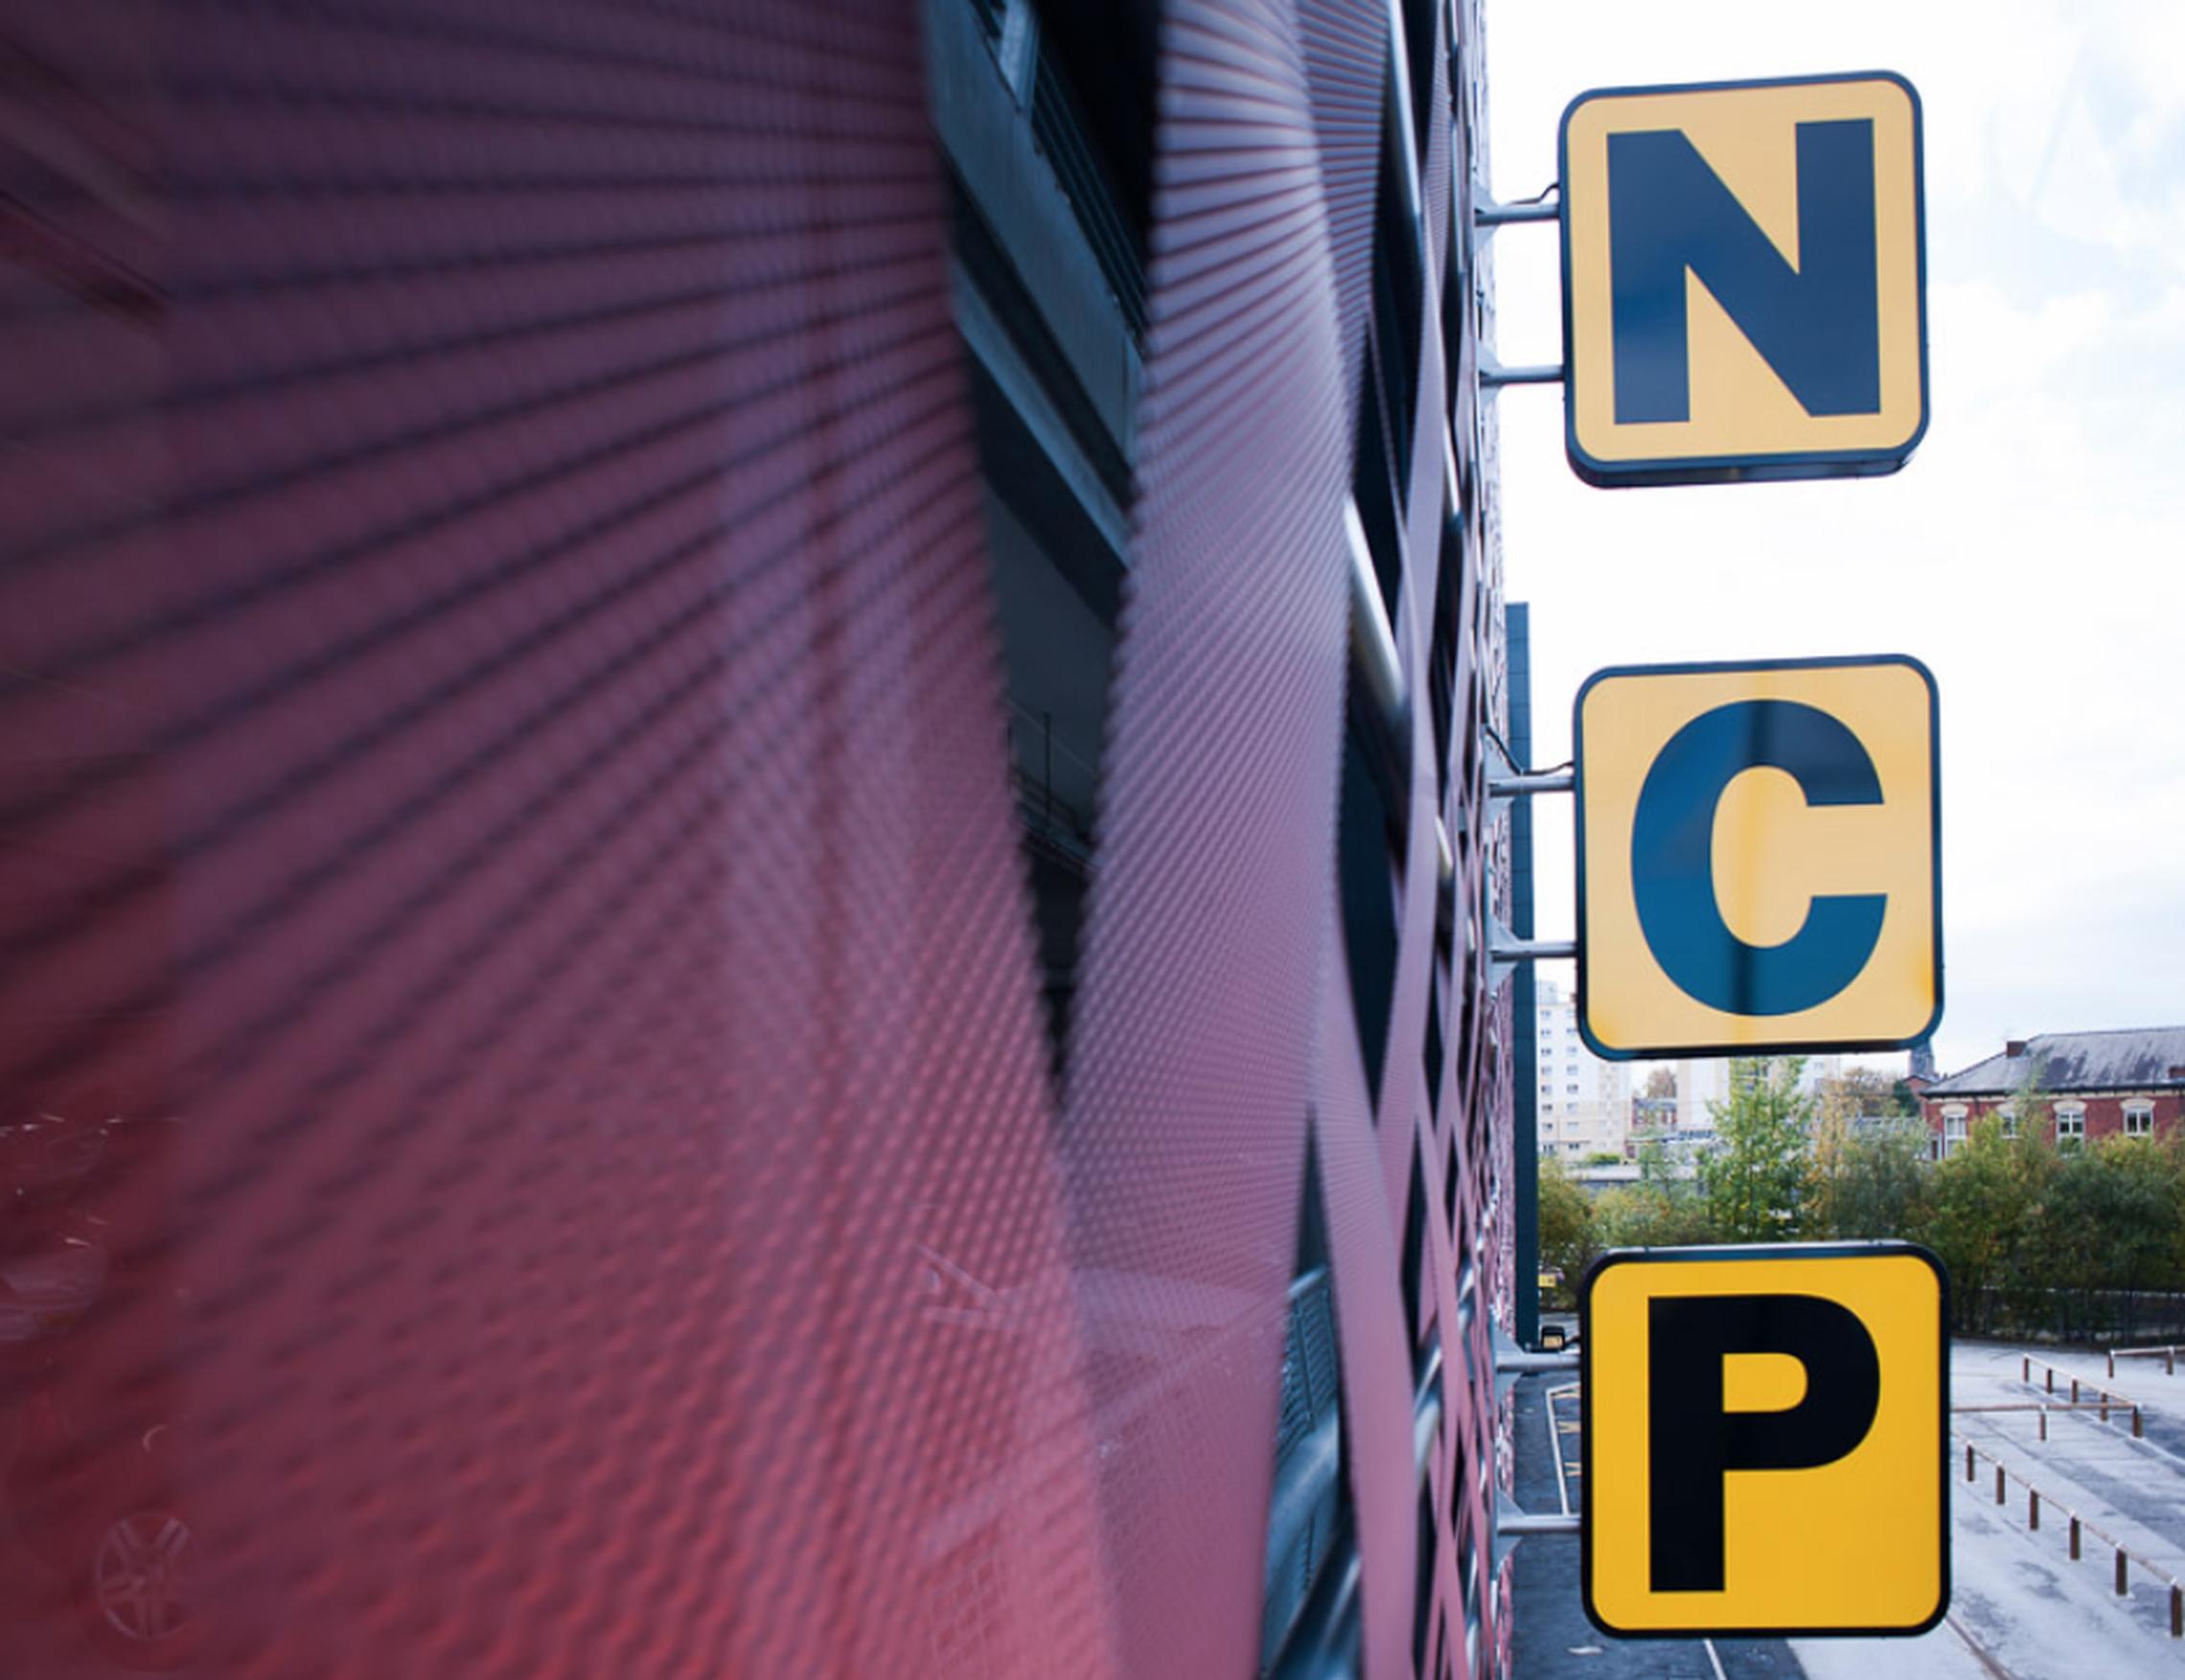 NCP operates around 500 car parks in the UK